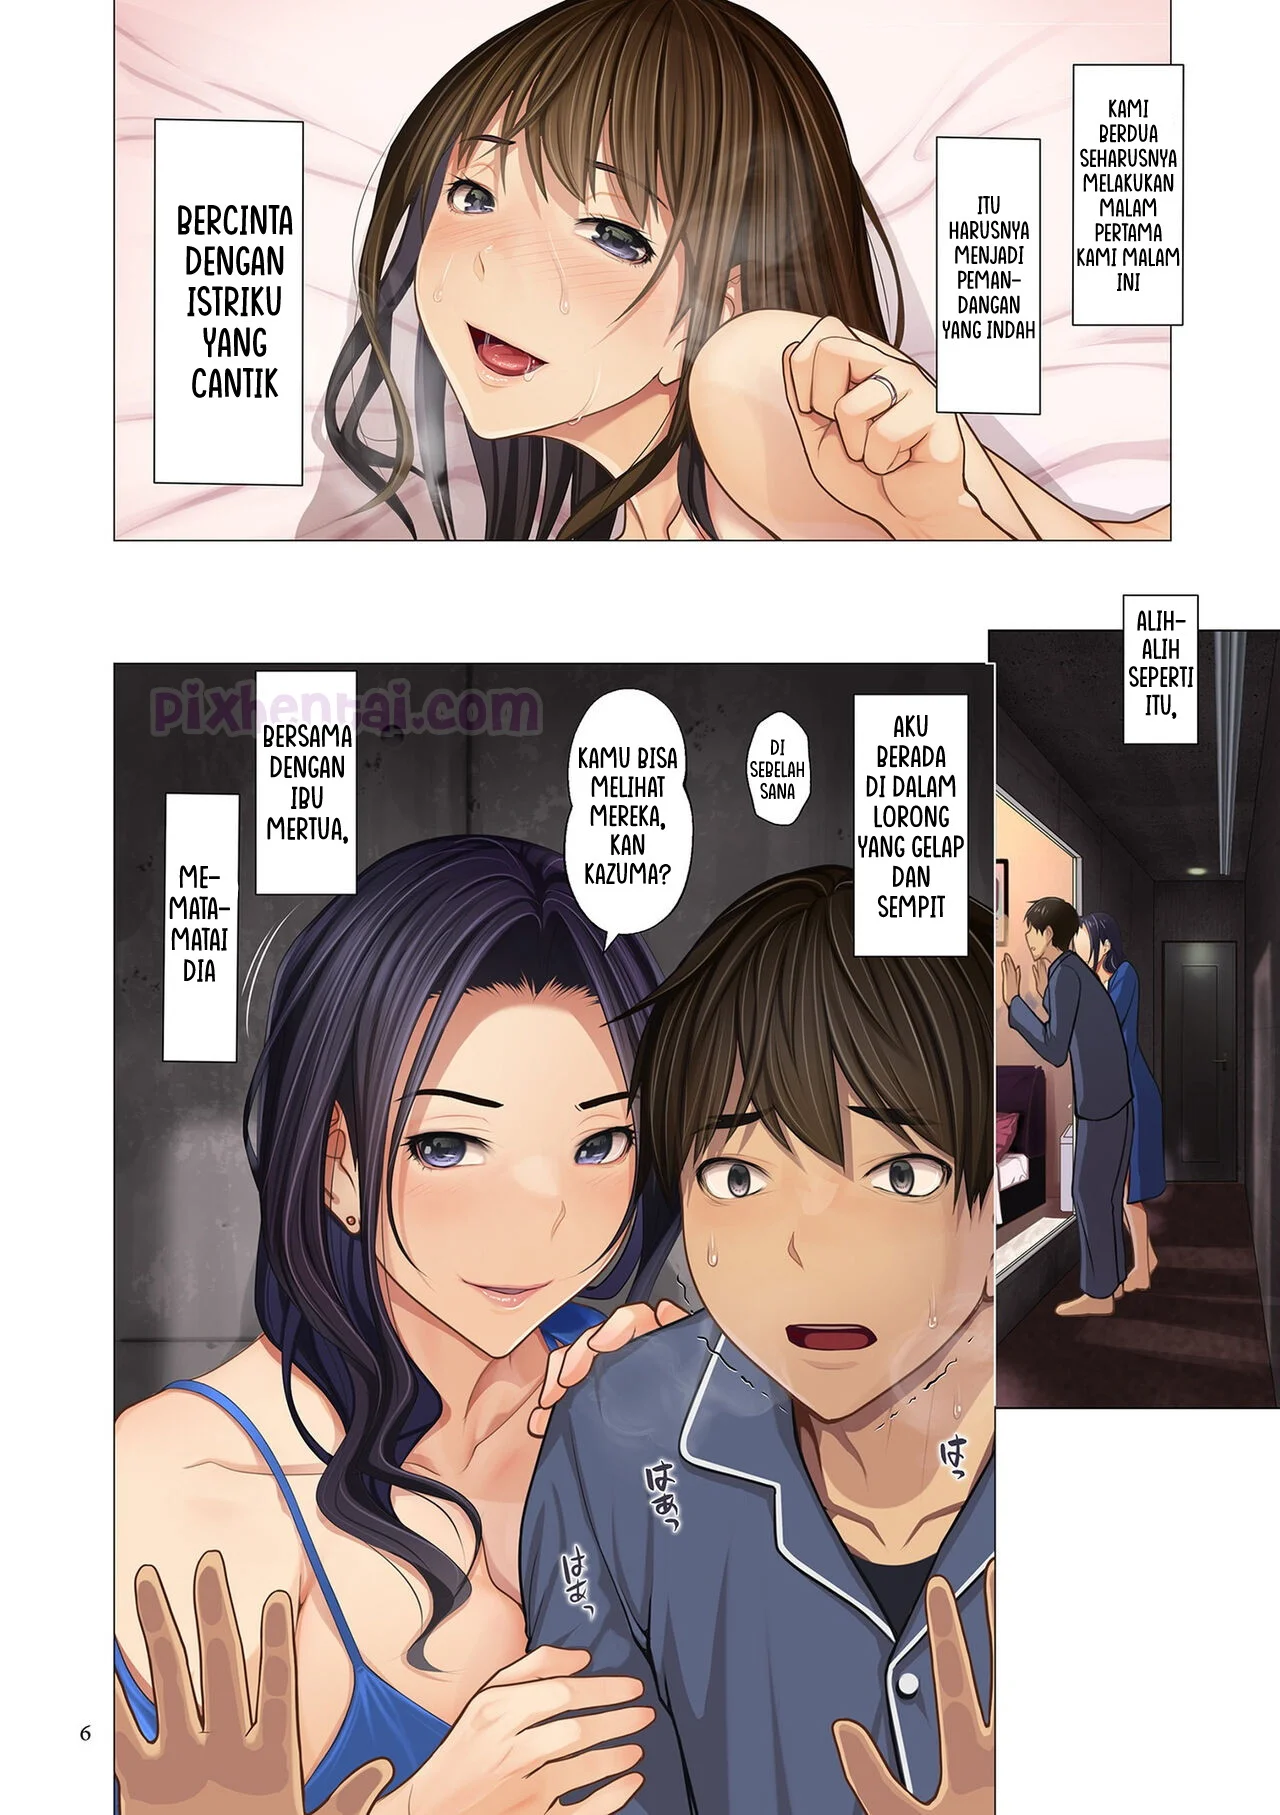 Komik hentai xxx manga sex bokep I married into a wealthy family All the women in the family except my wife are mine part 1 2